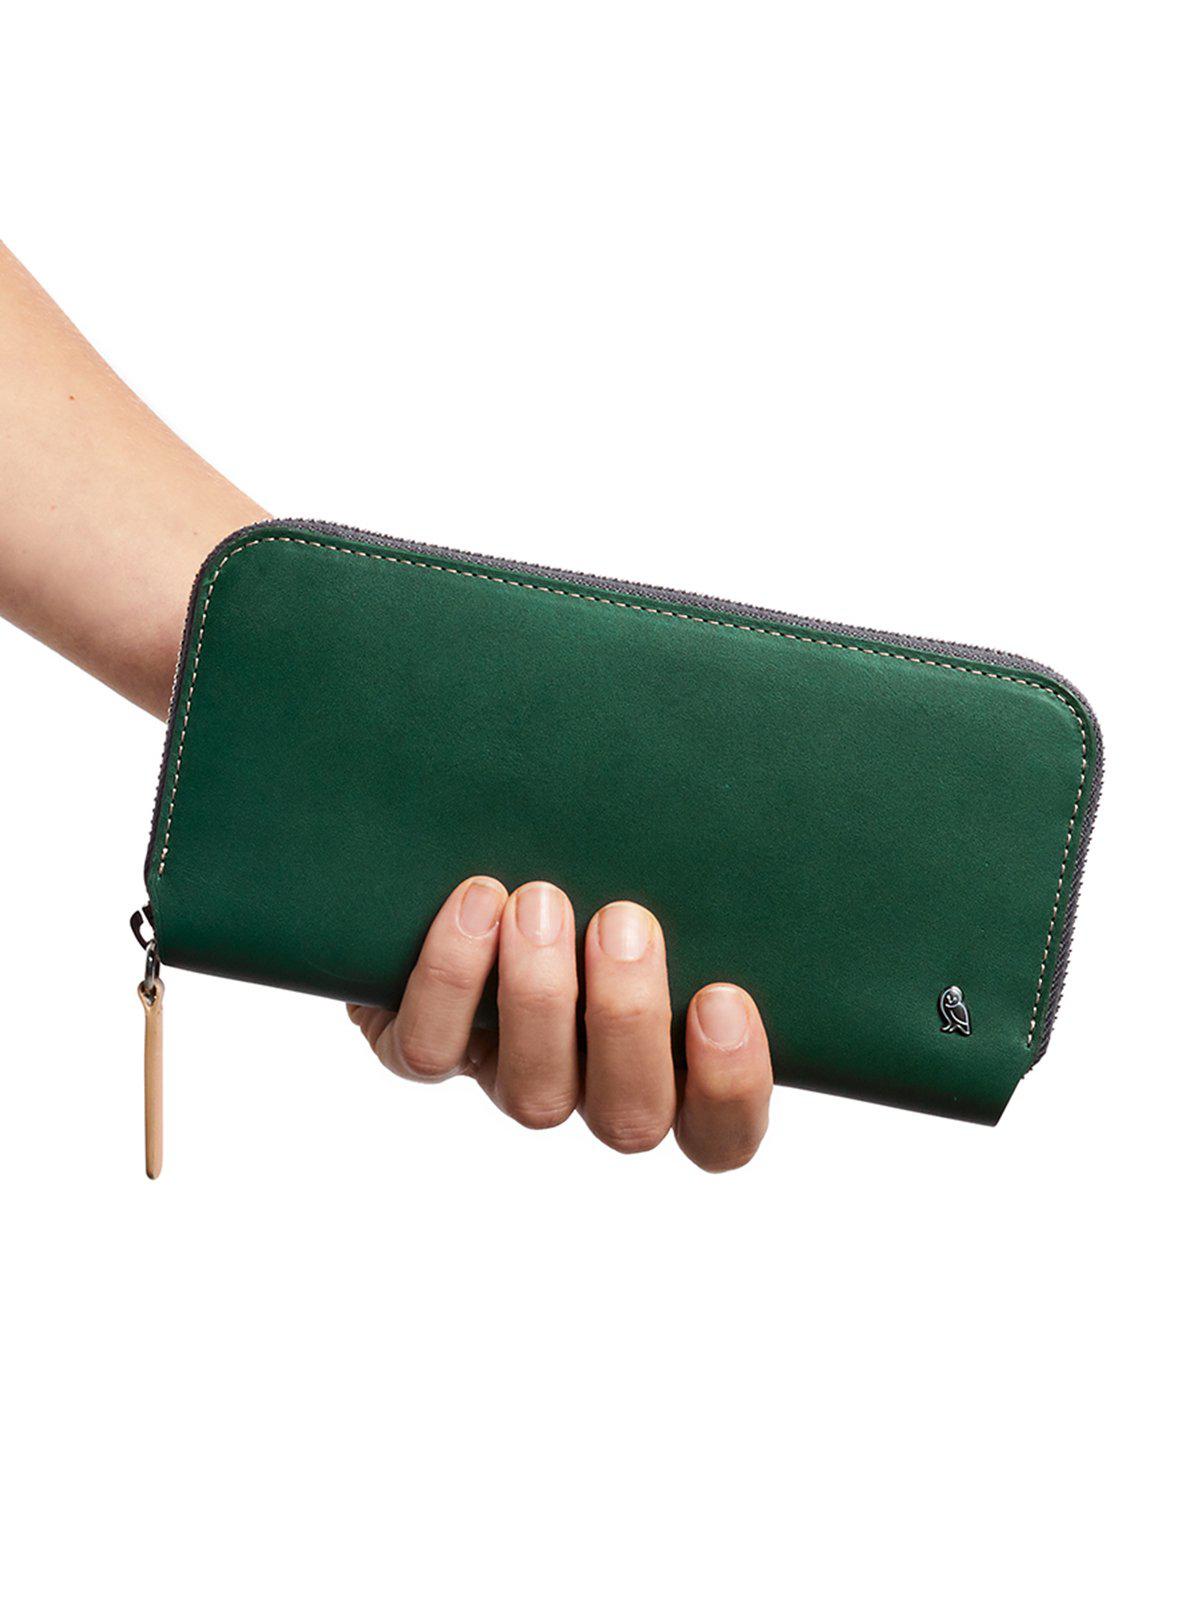 Bellroy Folio Wallet Racing Green RFID - MORE by Morello Indonesia